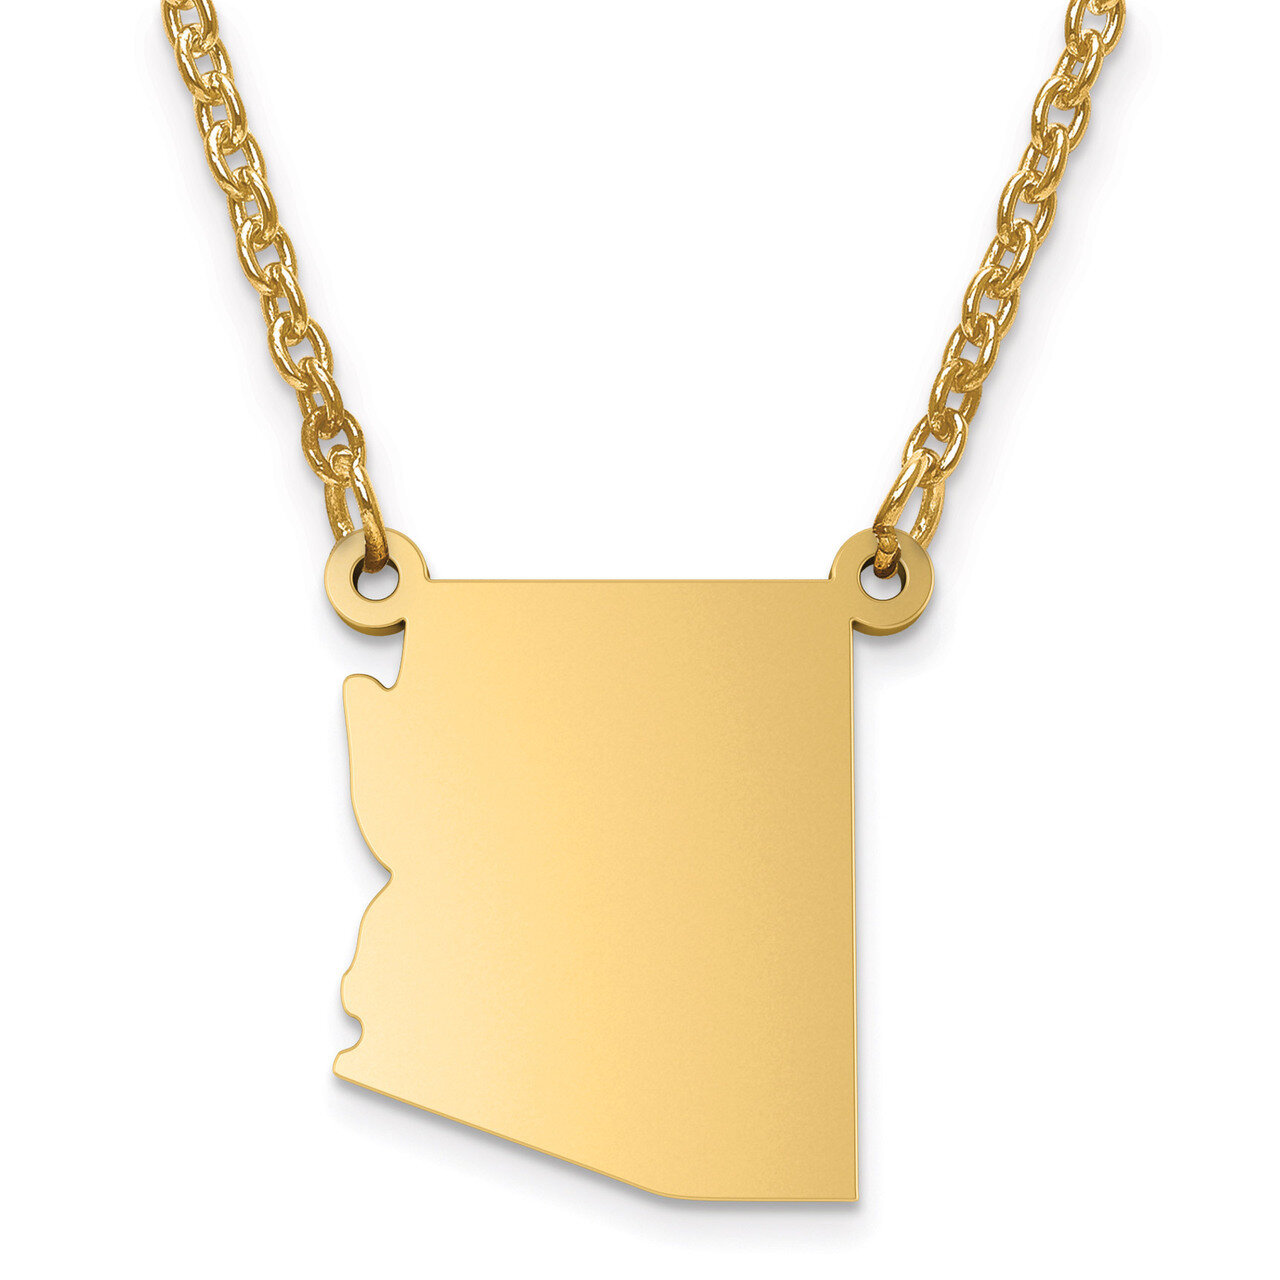 Arizona State Pendant with Chain Engravable Gold-plated on Sterling Silver